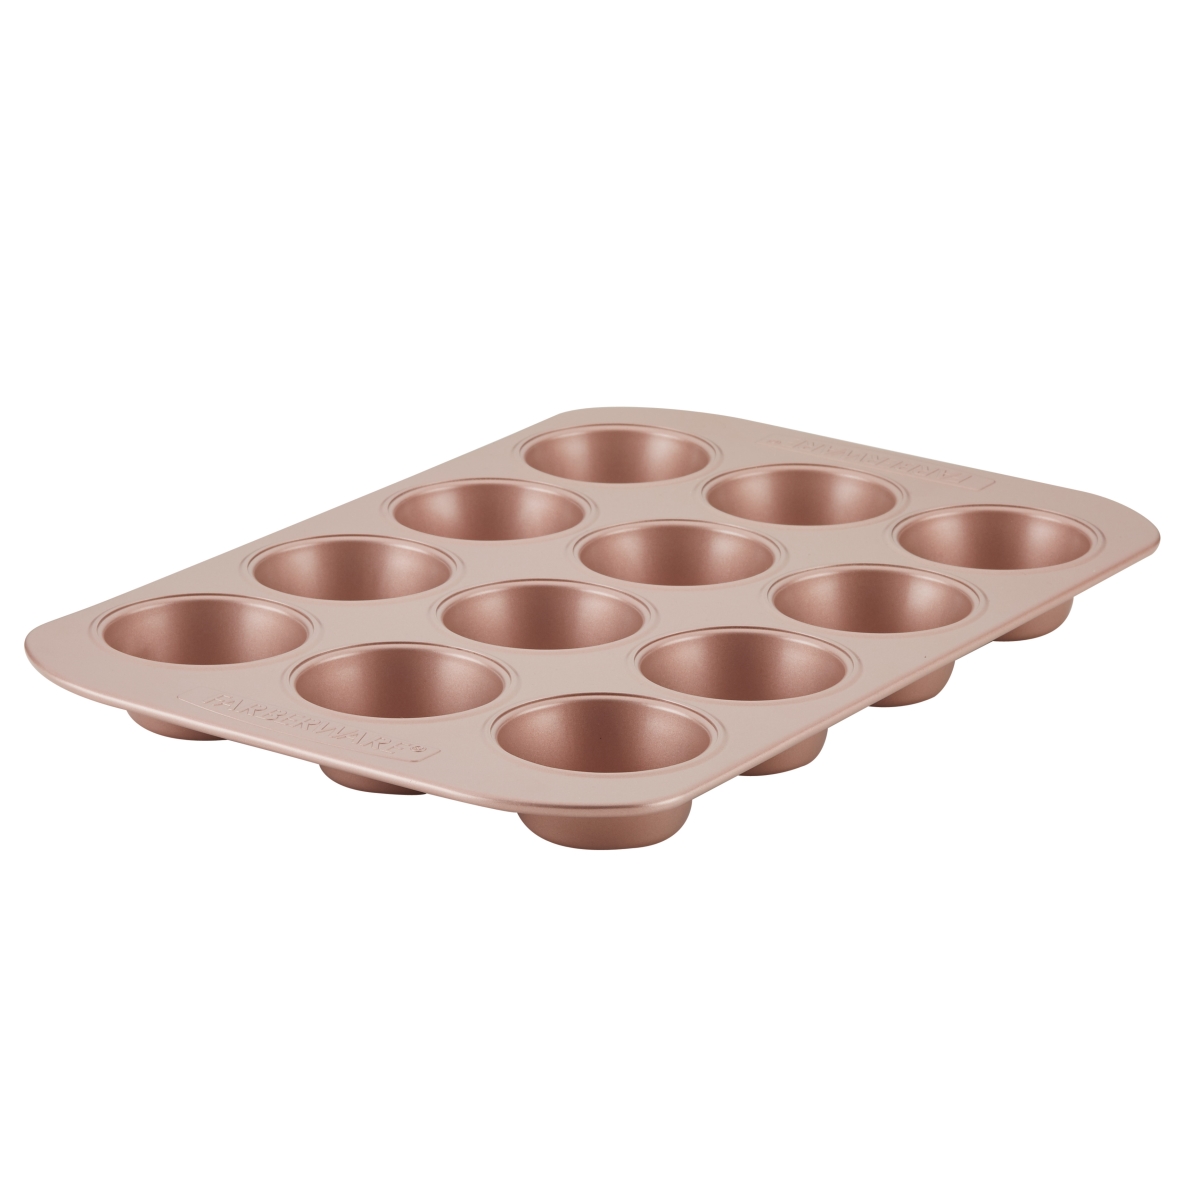 47776 12 Cup Nonstick Bakeware Muffin Pan - Rose Gold